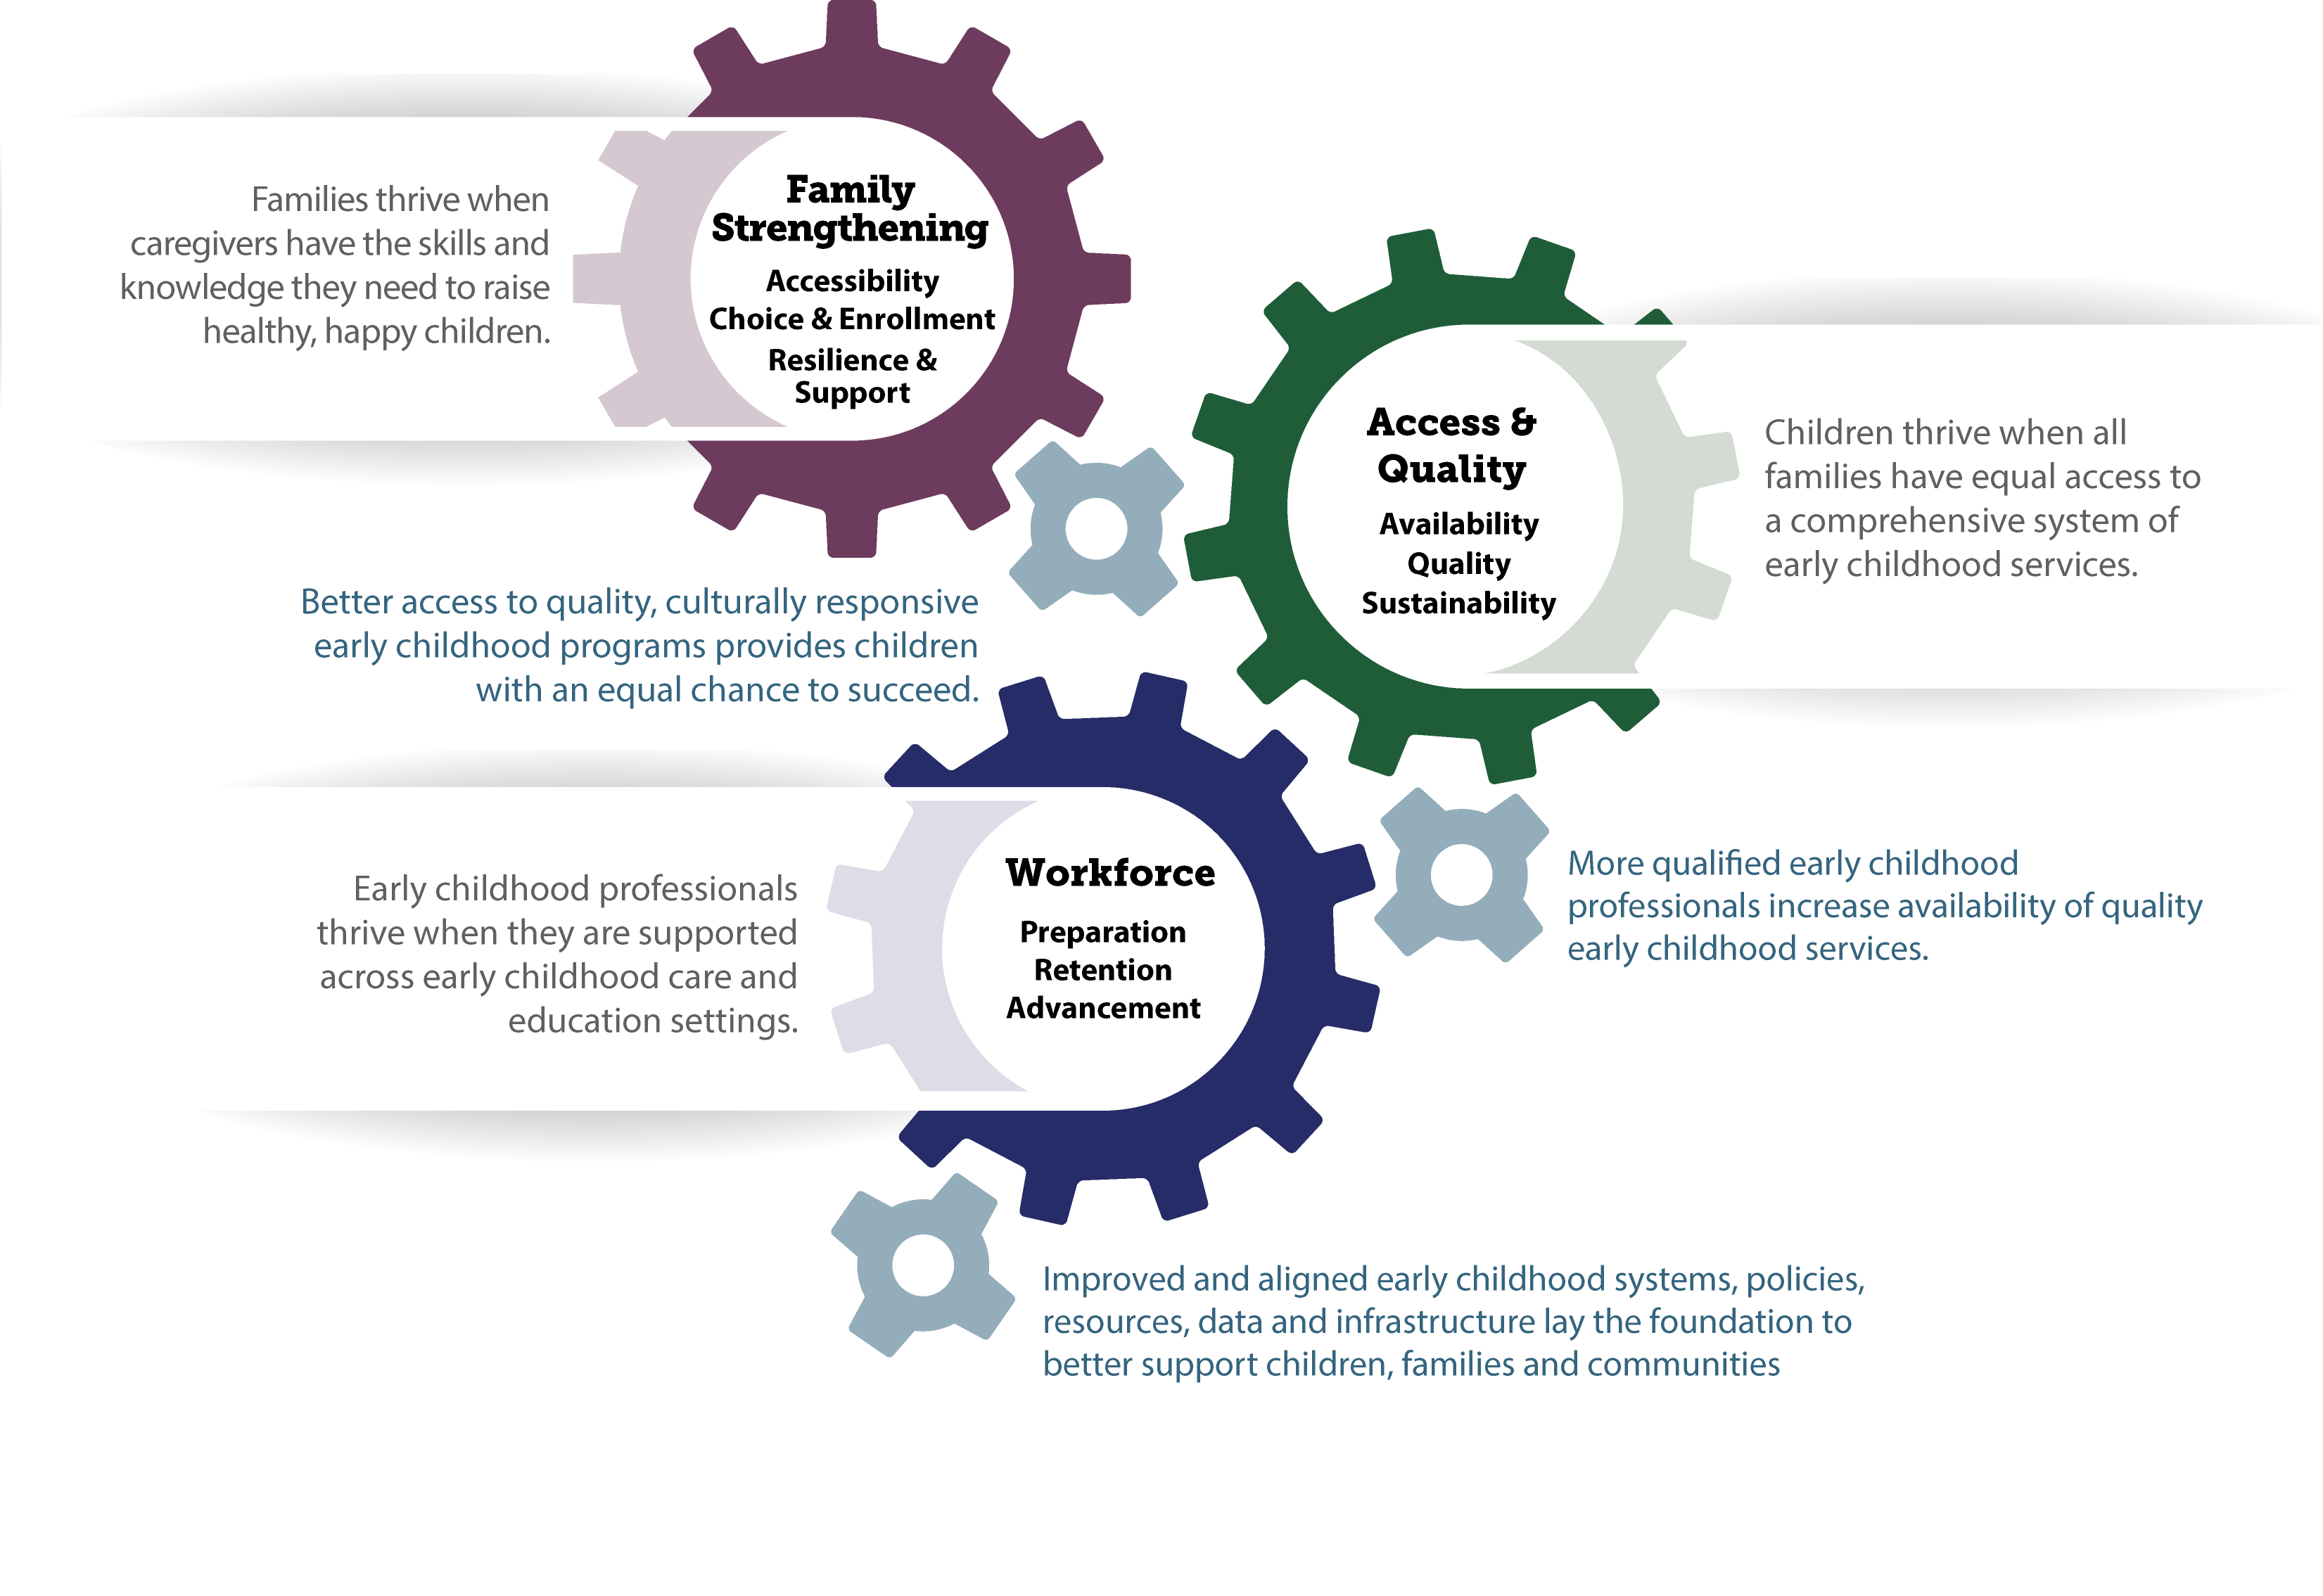 Three connected gears describing the strategy categories: strengthening families, increasing equitable access, and developing a stable workforce